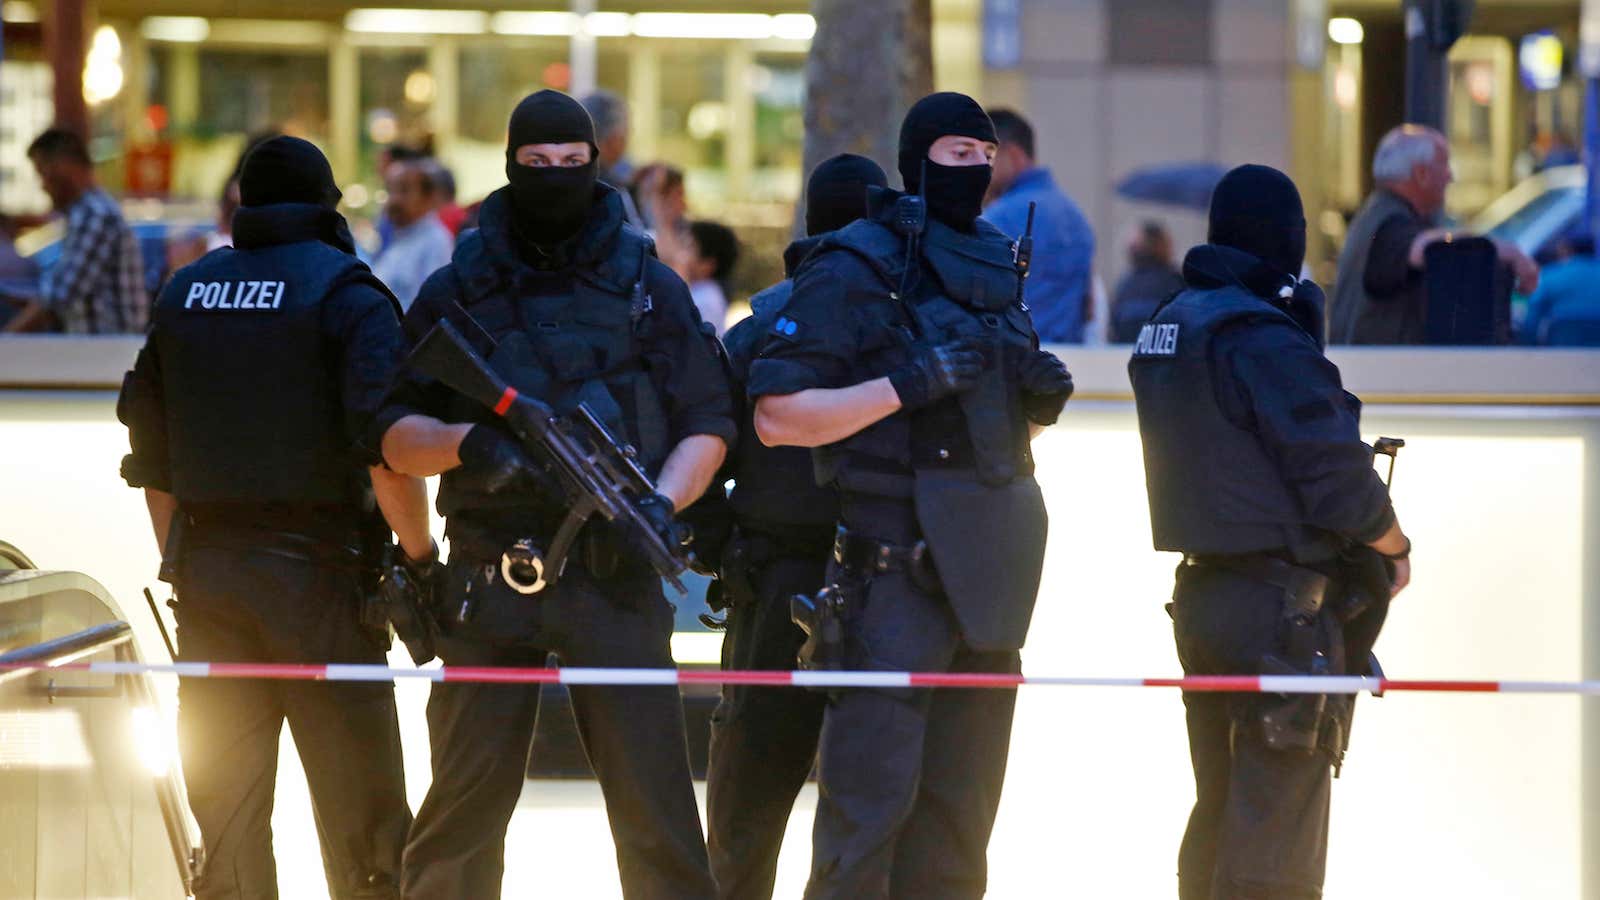 Special forces police officers stand guard in Munich.